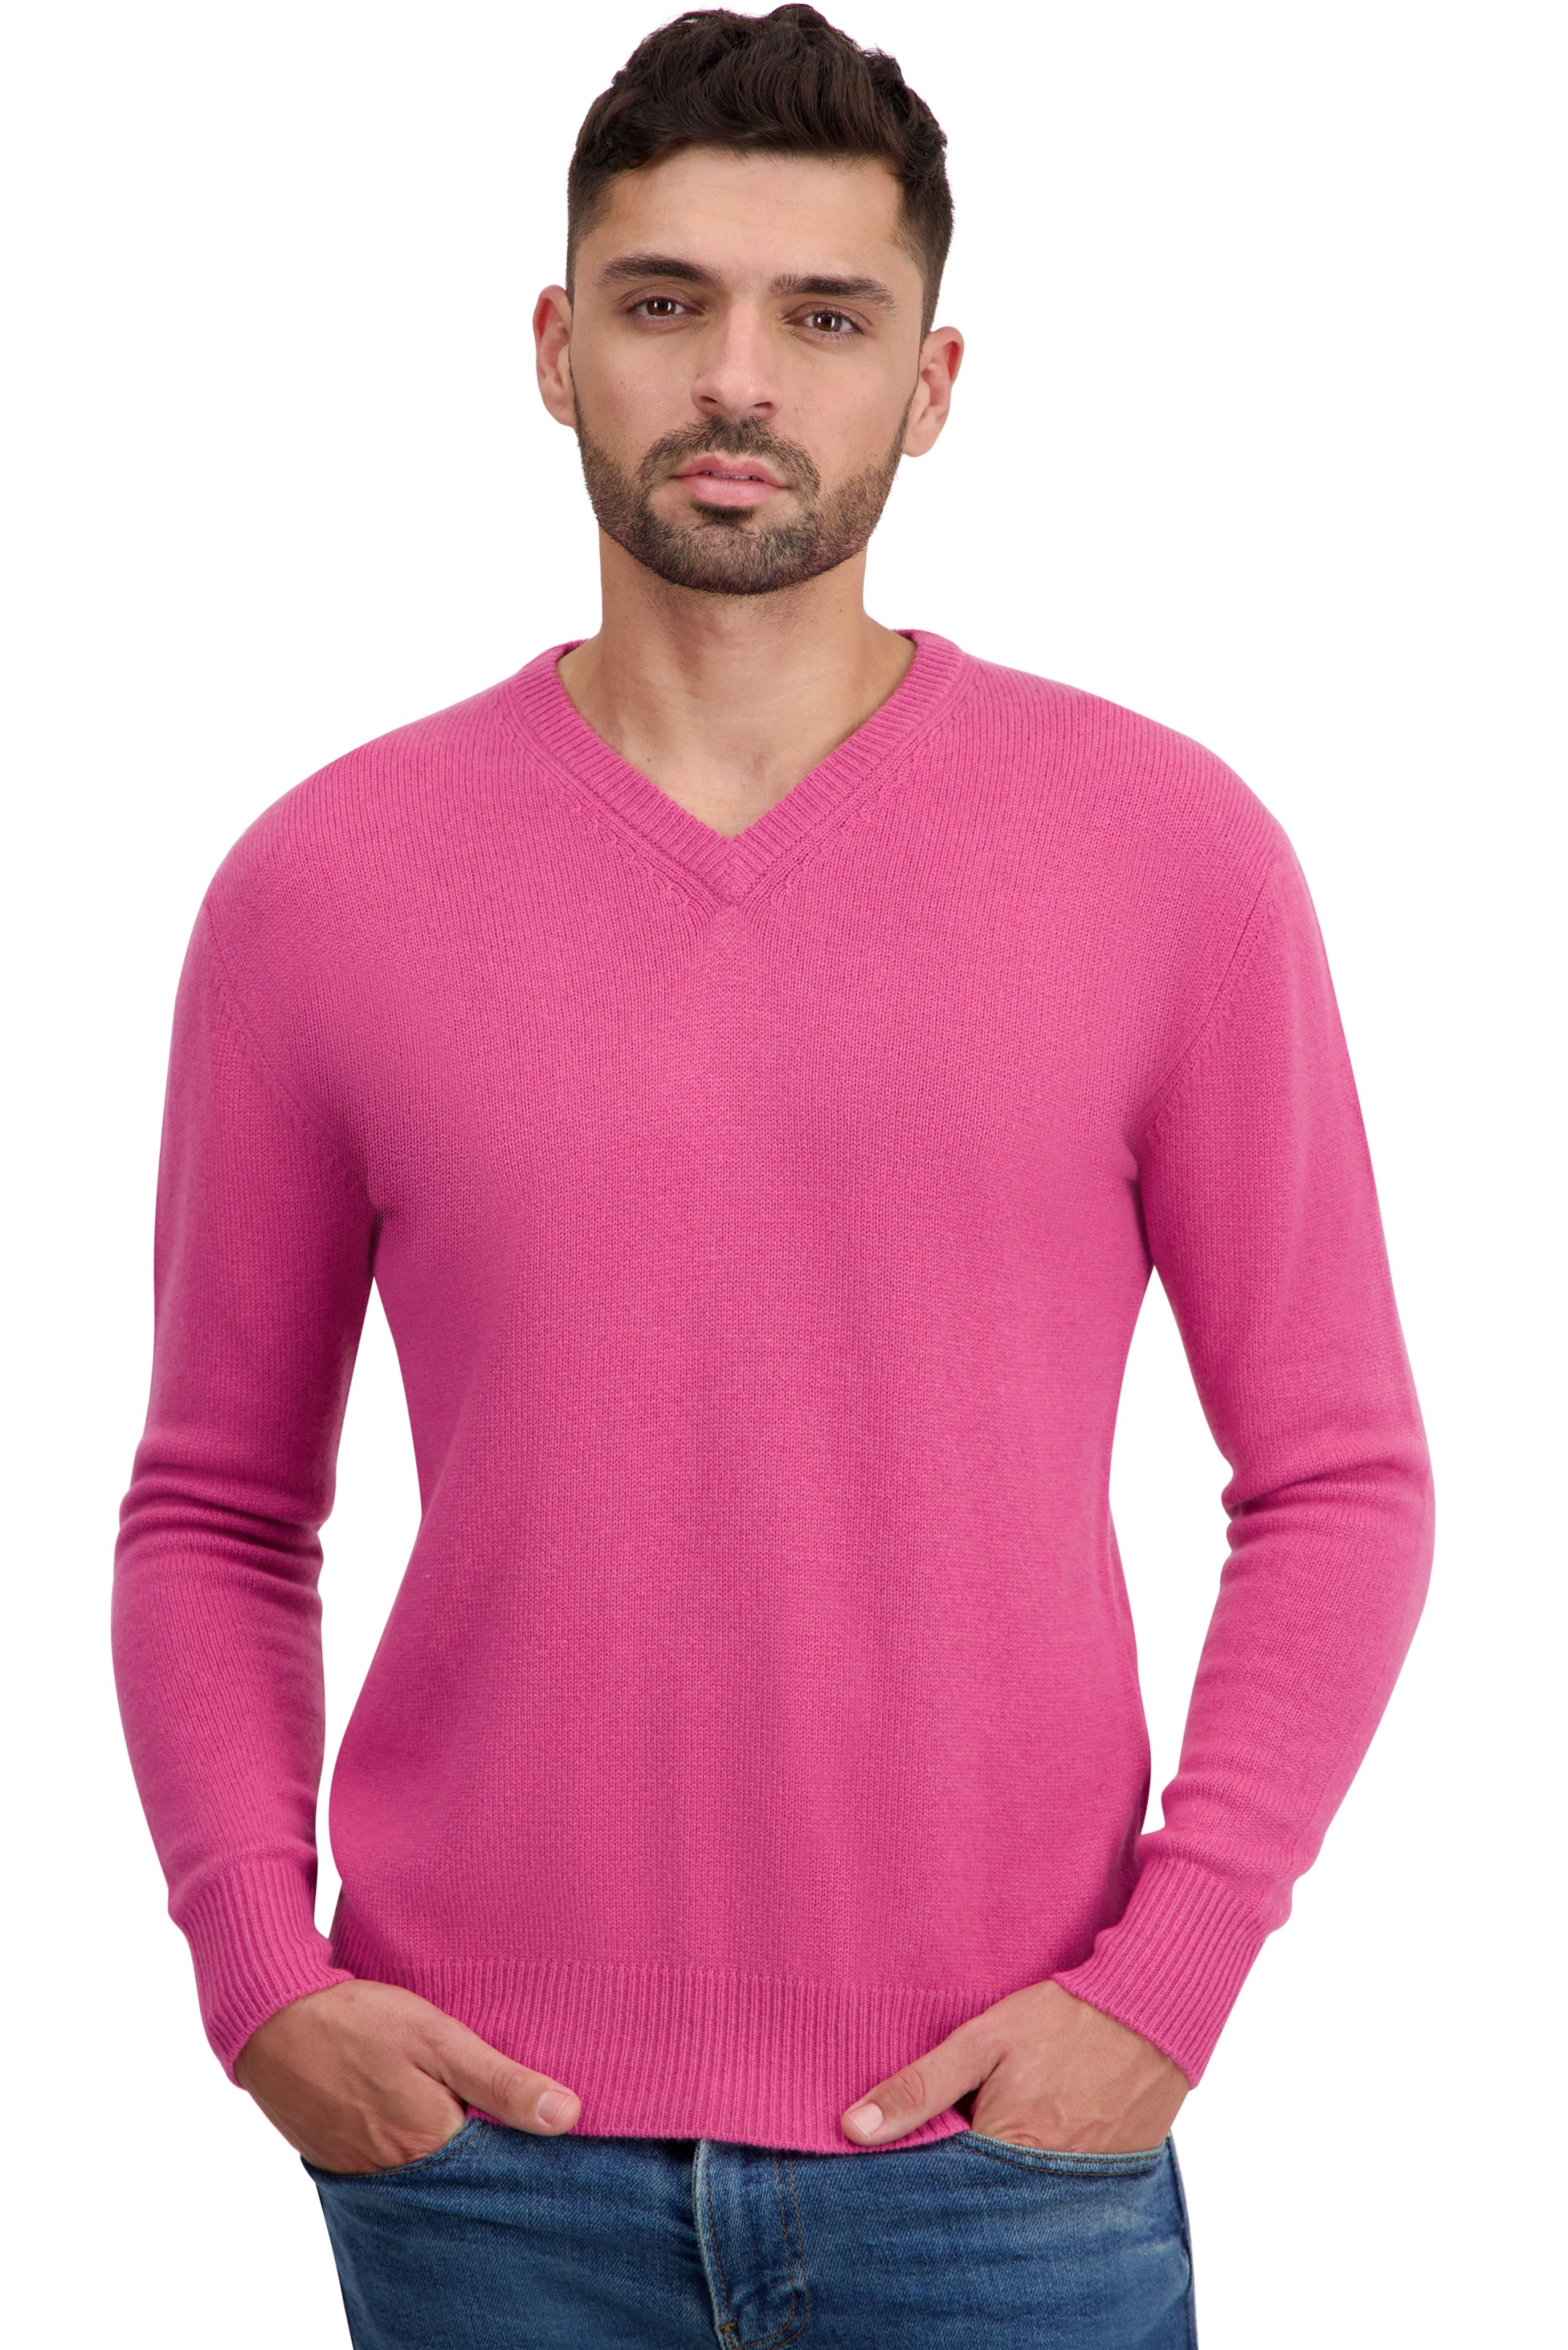 Cashmere men basic sweaters at low prices tour first poinsetta 3xl